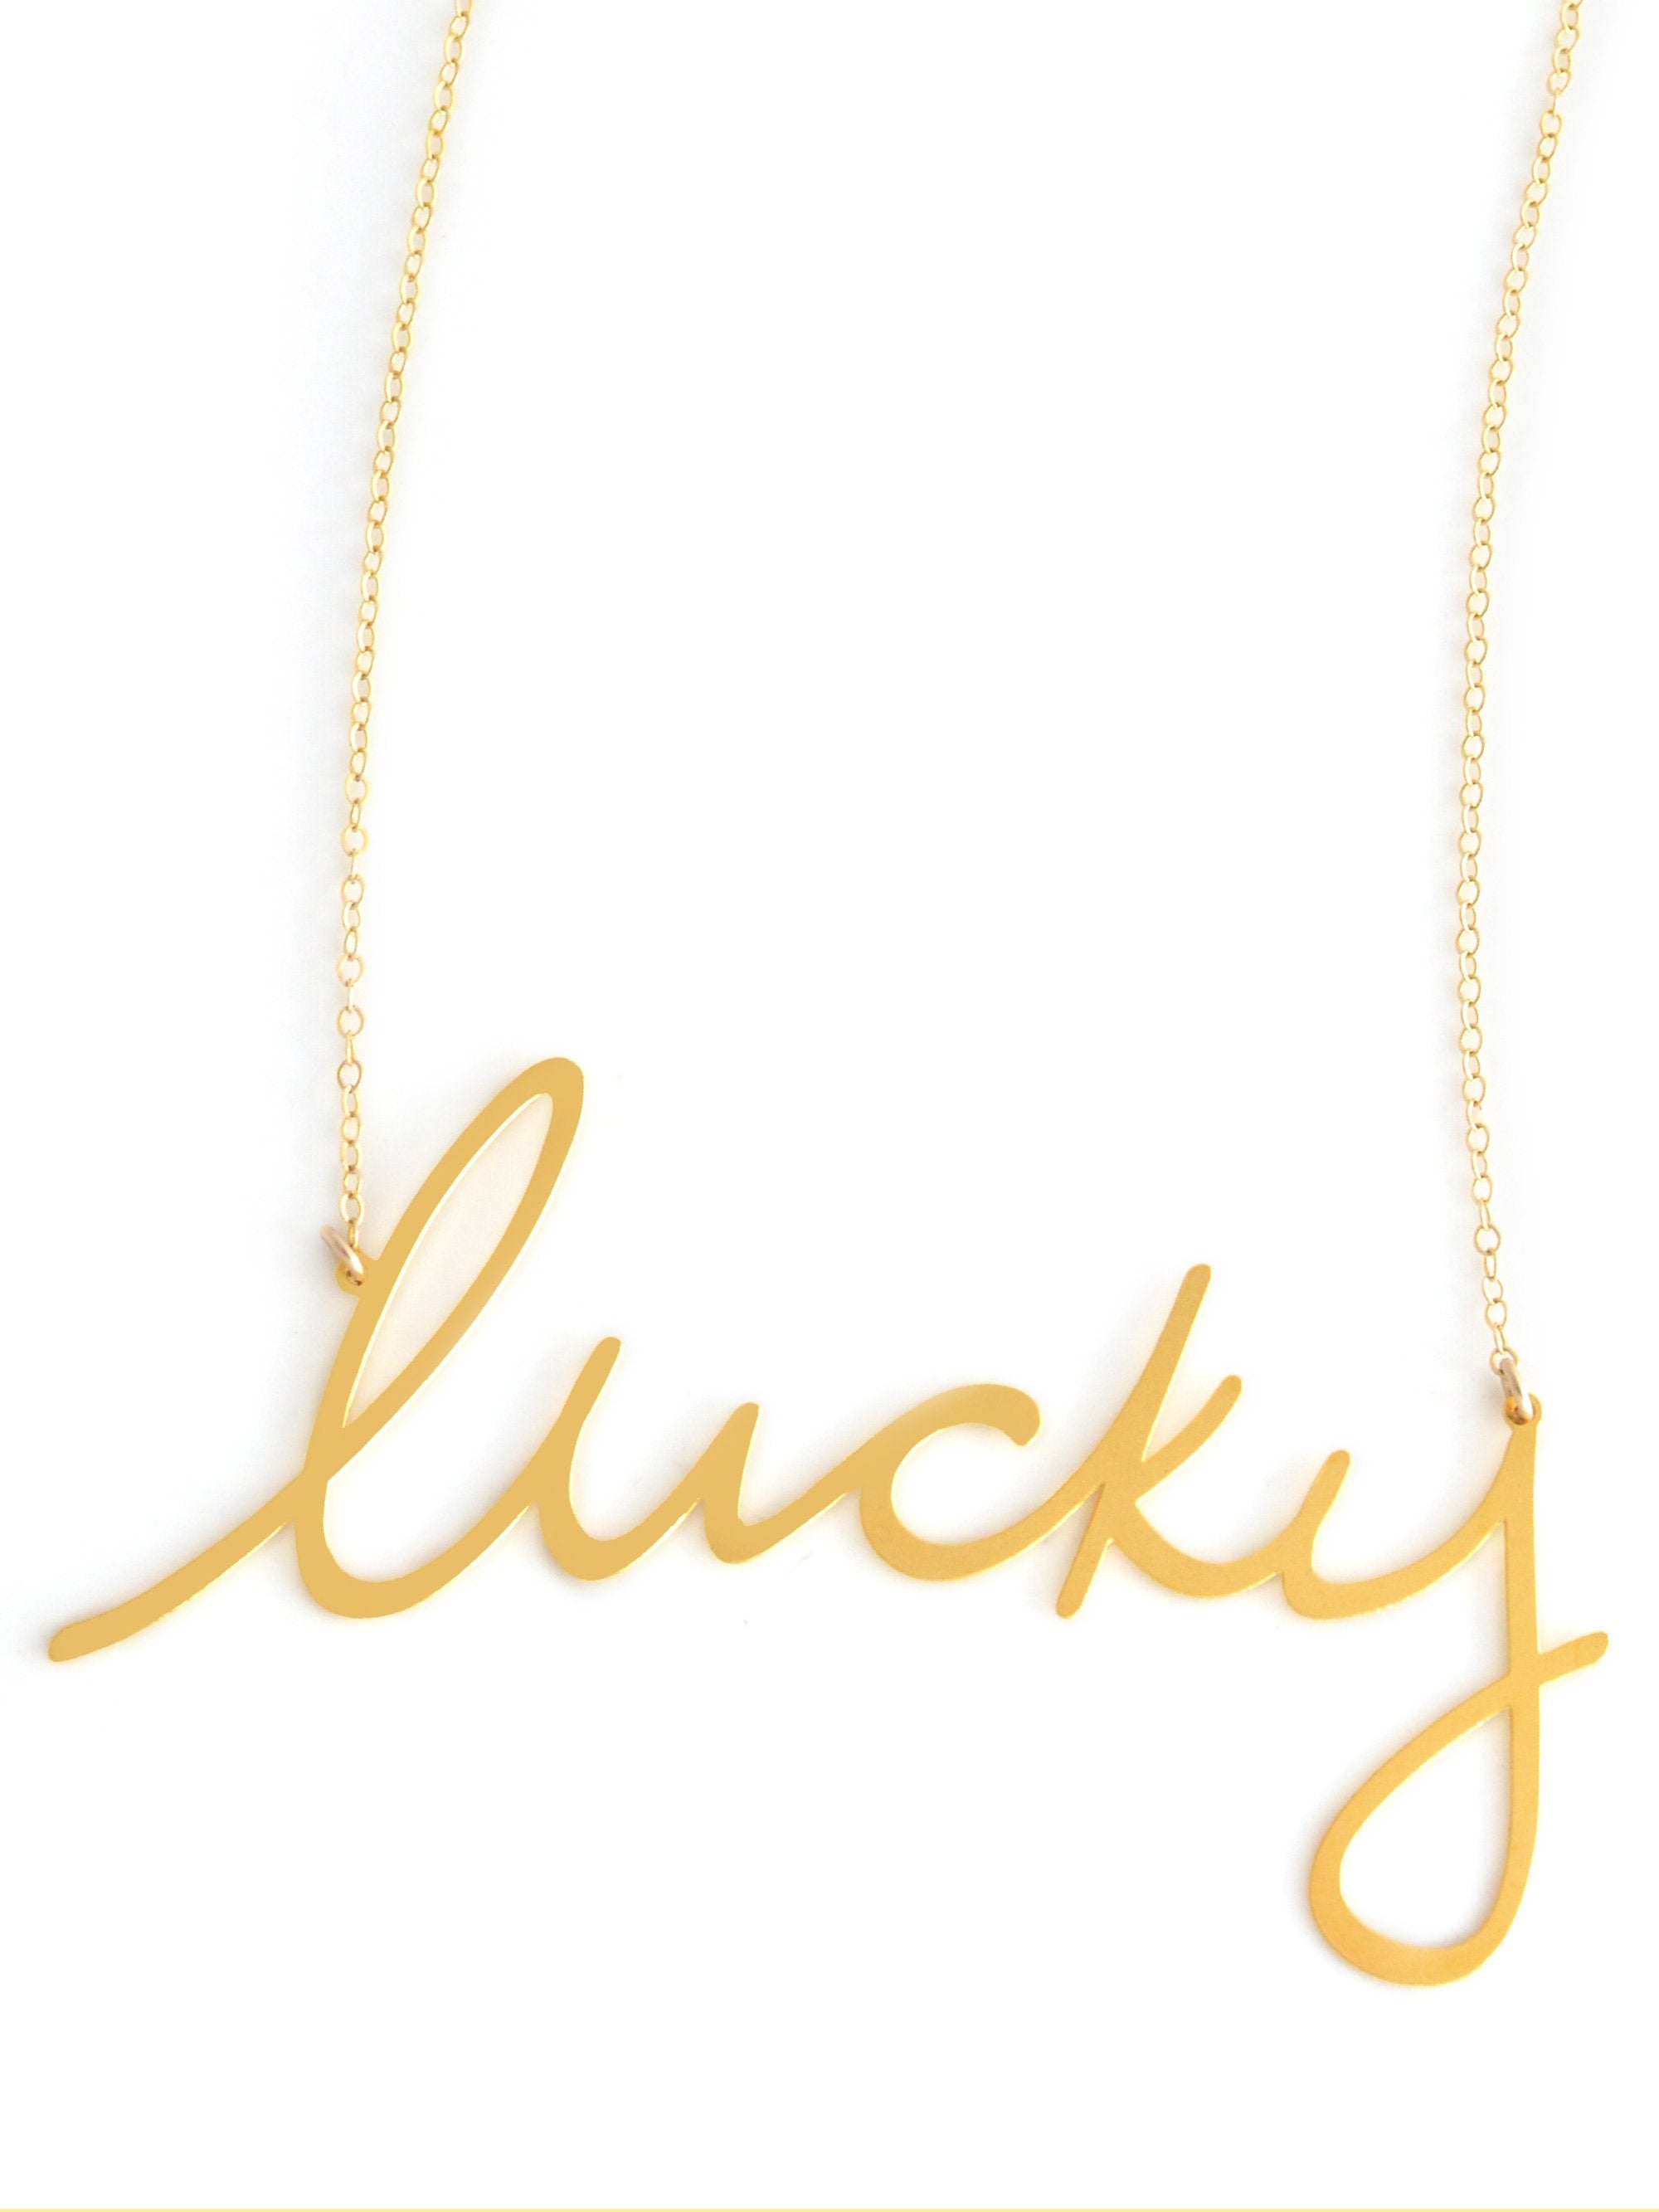 Lucky Necklace - High Quality, Affordable, Hand Written, Self Love, Mantra Word Necklace - Available in Gold and Silver - Small and Large Sizes - Made in USA - Brevity Jewelry